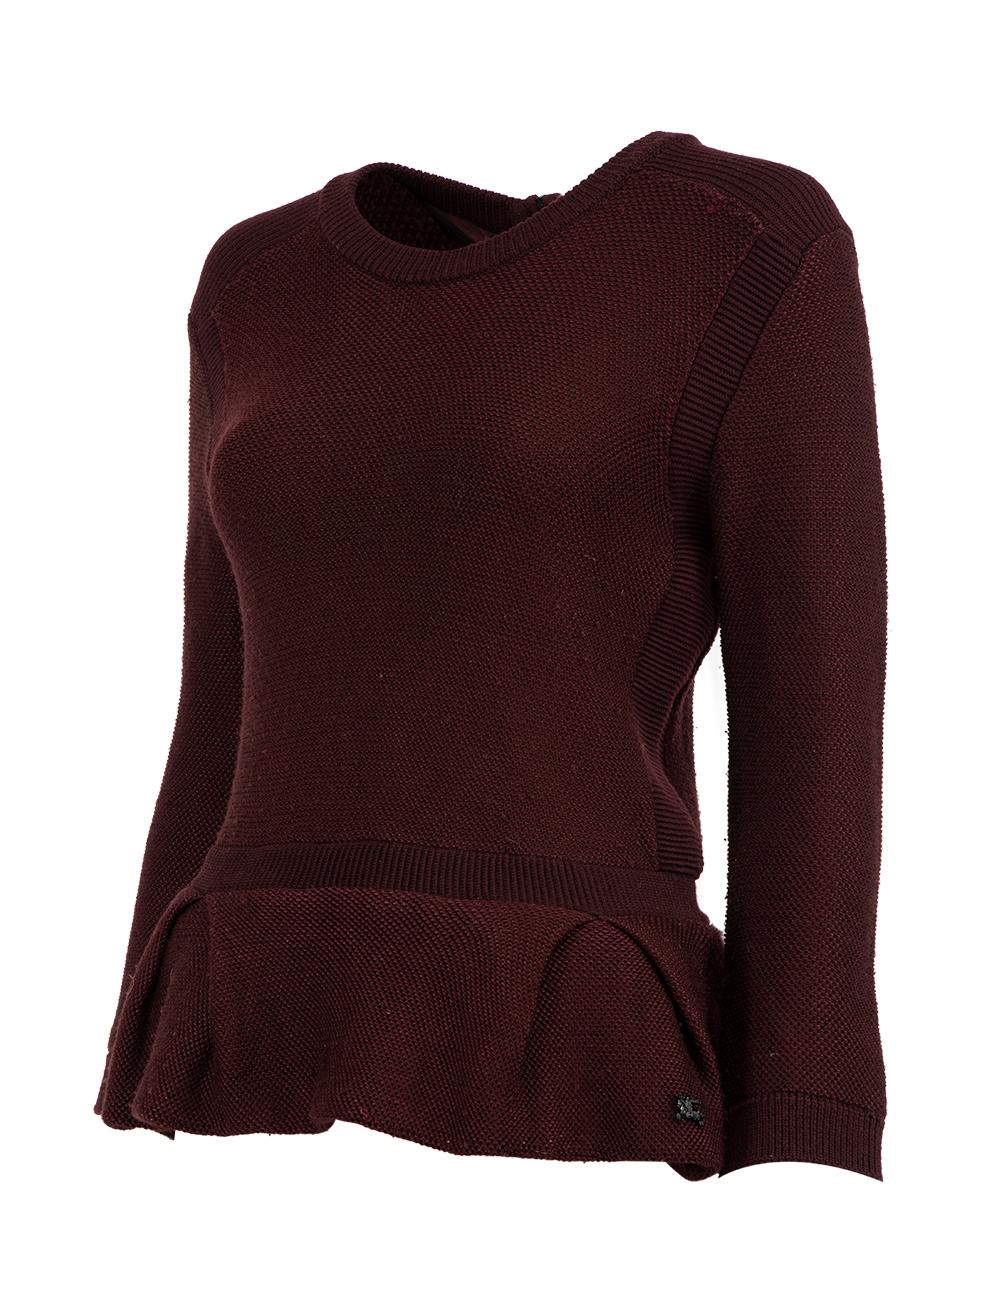 Pre-Loved Burberry Women's Burgundy Knitted Jumper Peplum Hem In Excellent Condition For Sale In London, GB